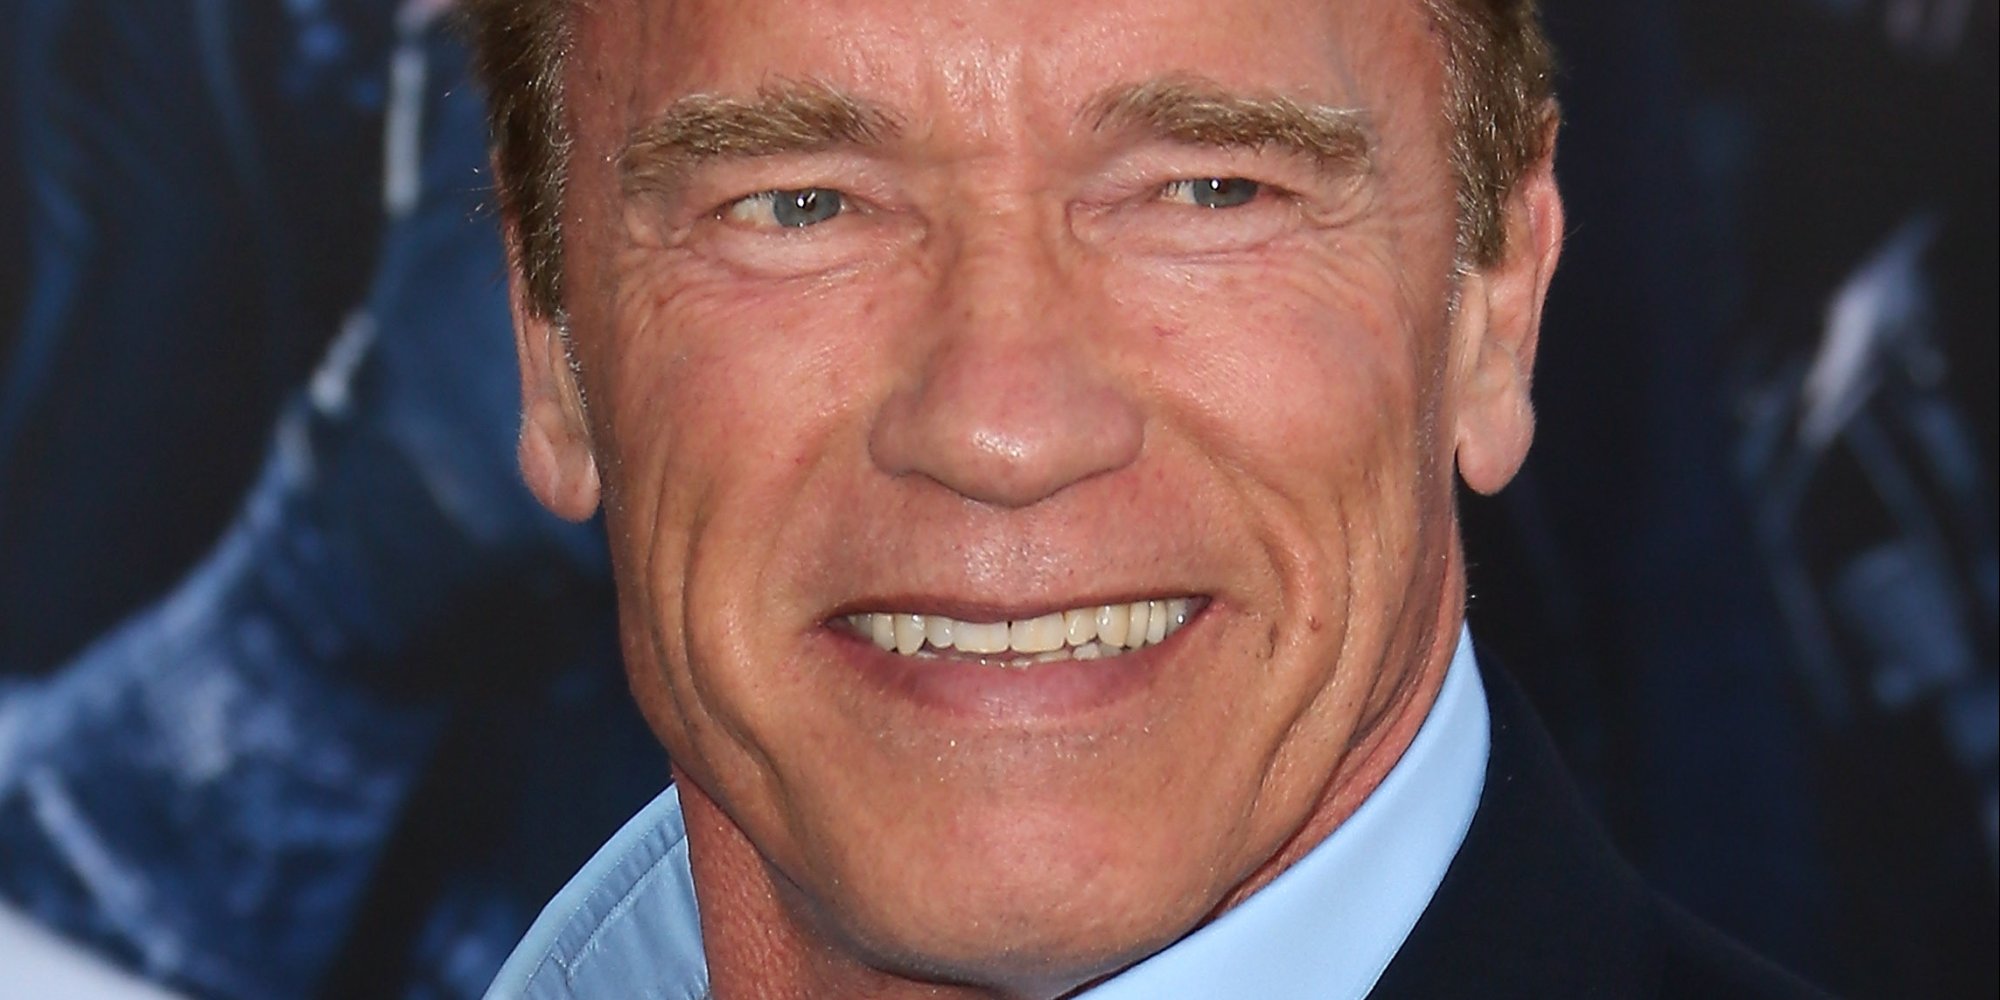 ARNOLD SCHWARZENEGGER Says Indiana Law Hurts Republican Party.